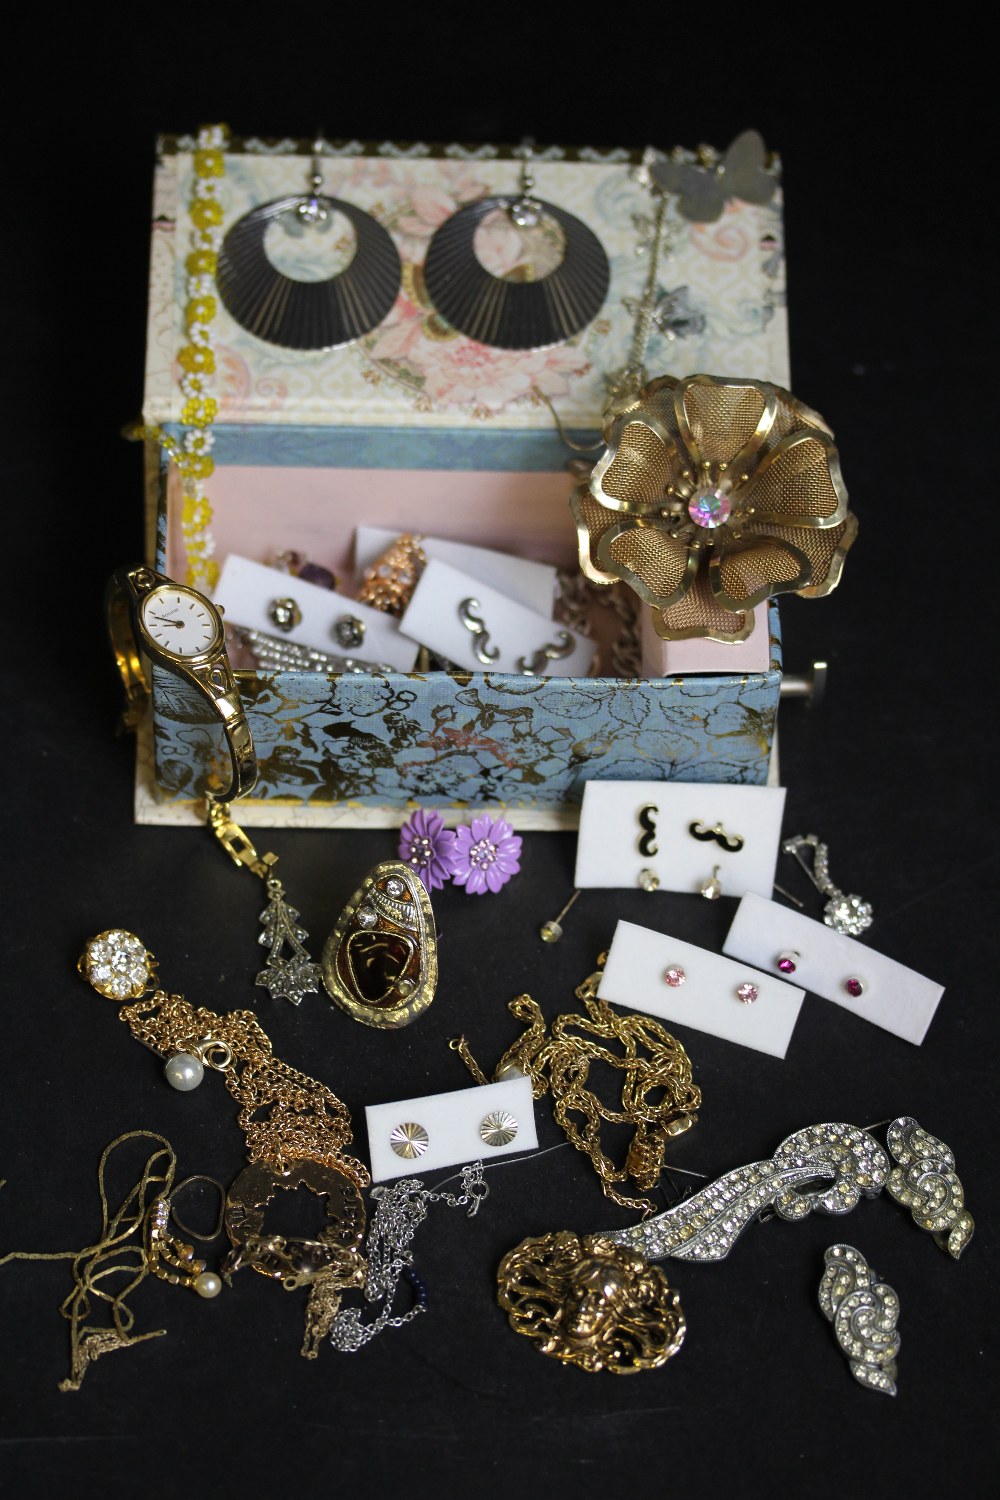 Decorated card musical jewellery box and a selection of costume jewellery